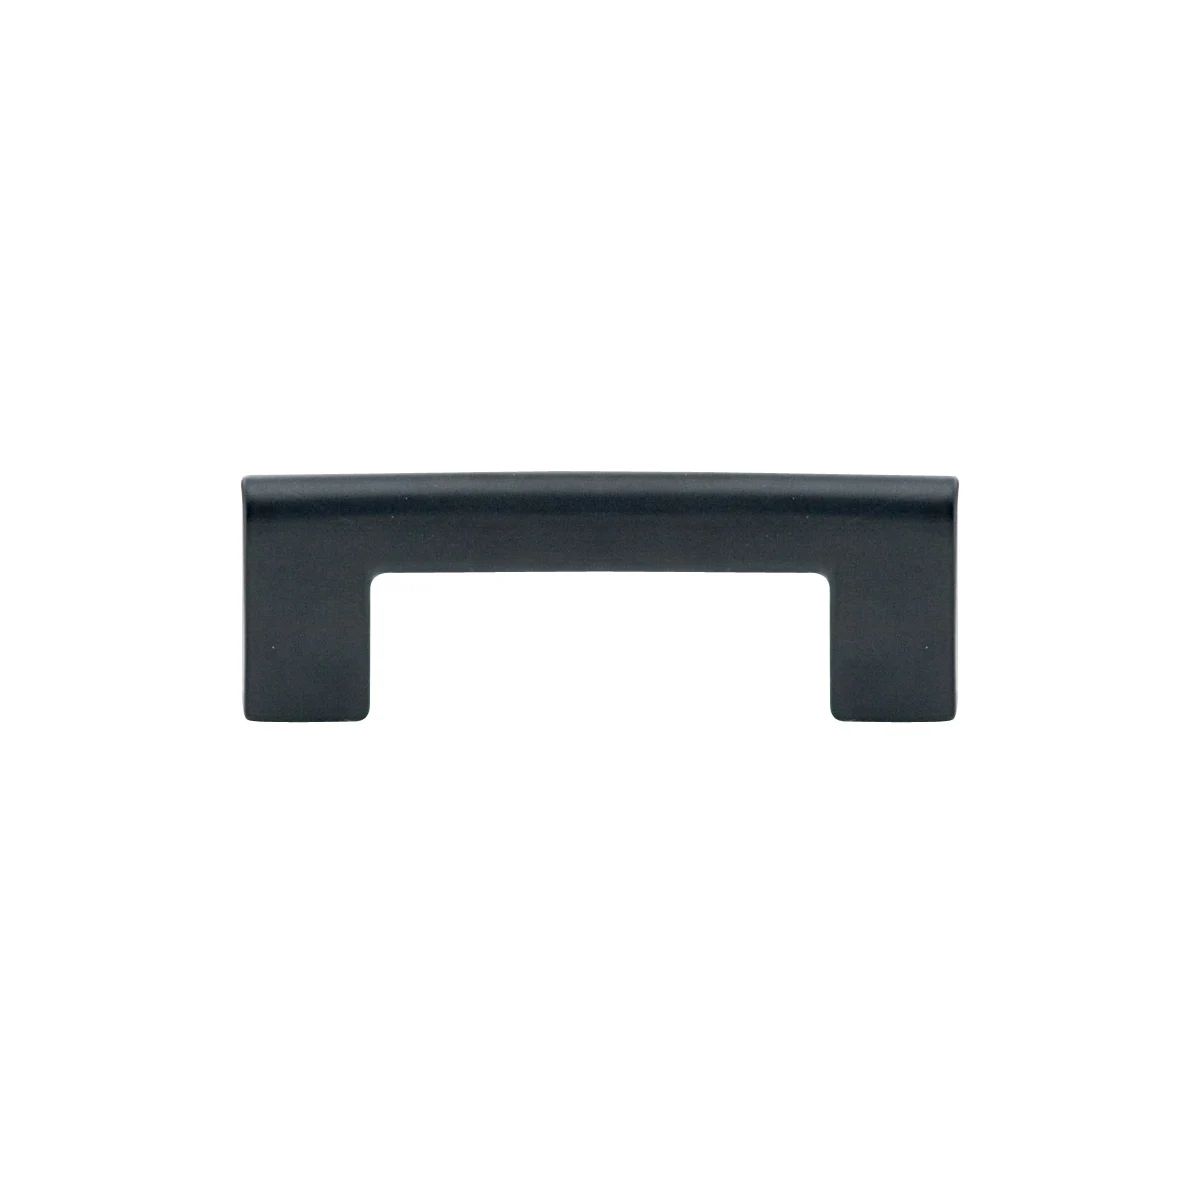 Trail 6 Inch Center to Center Handle Cabinet Pull | Build.com, Inc.